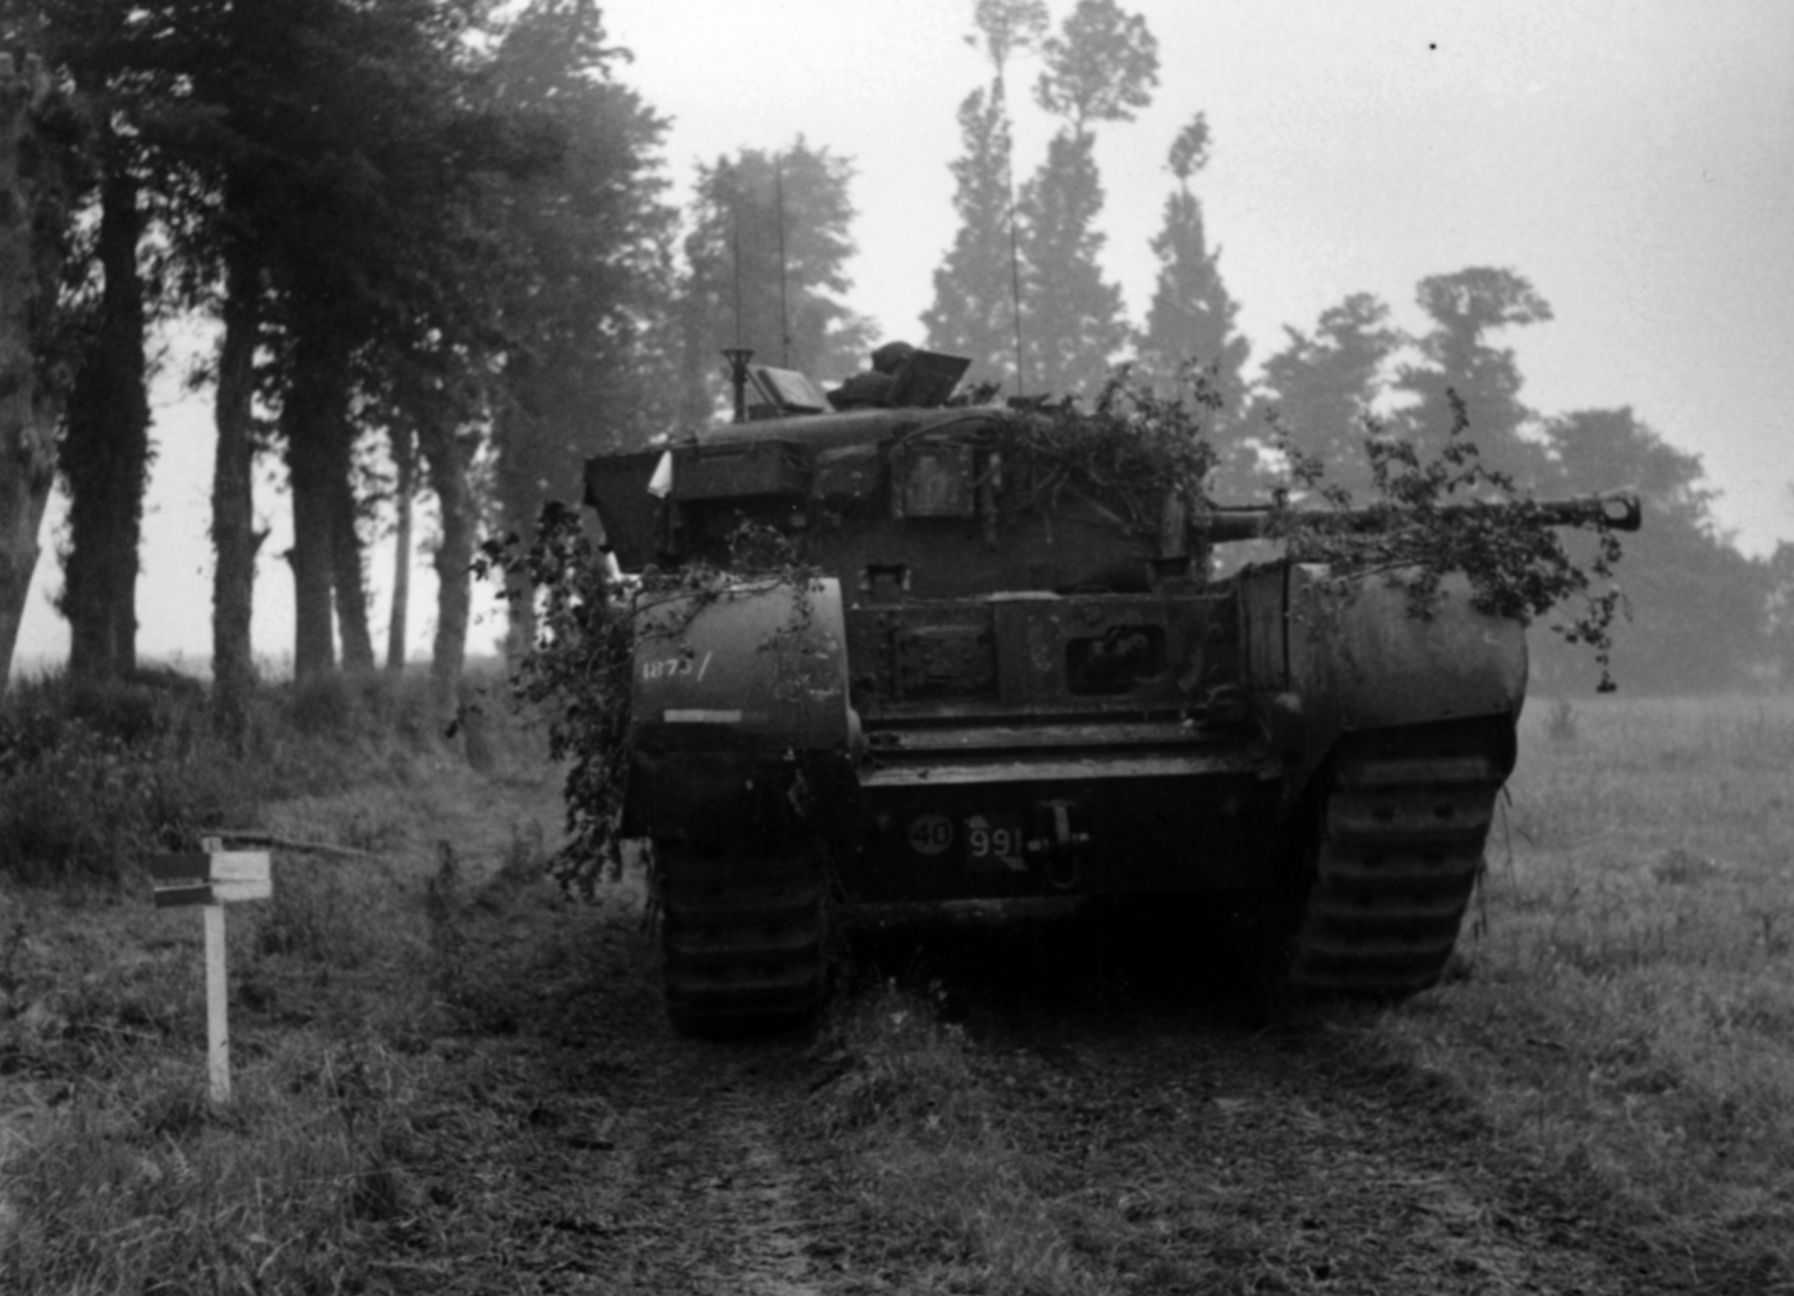 During Operation Epsom near the French town of Caen, a Churchill tank of the 7th Royal Tank Regiment, 31st Tank Brigade moves along a dirt road. Branches have been placed about the hull as makeshift camouflage.